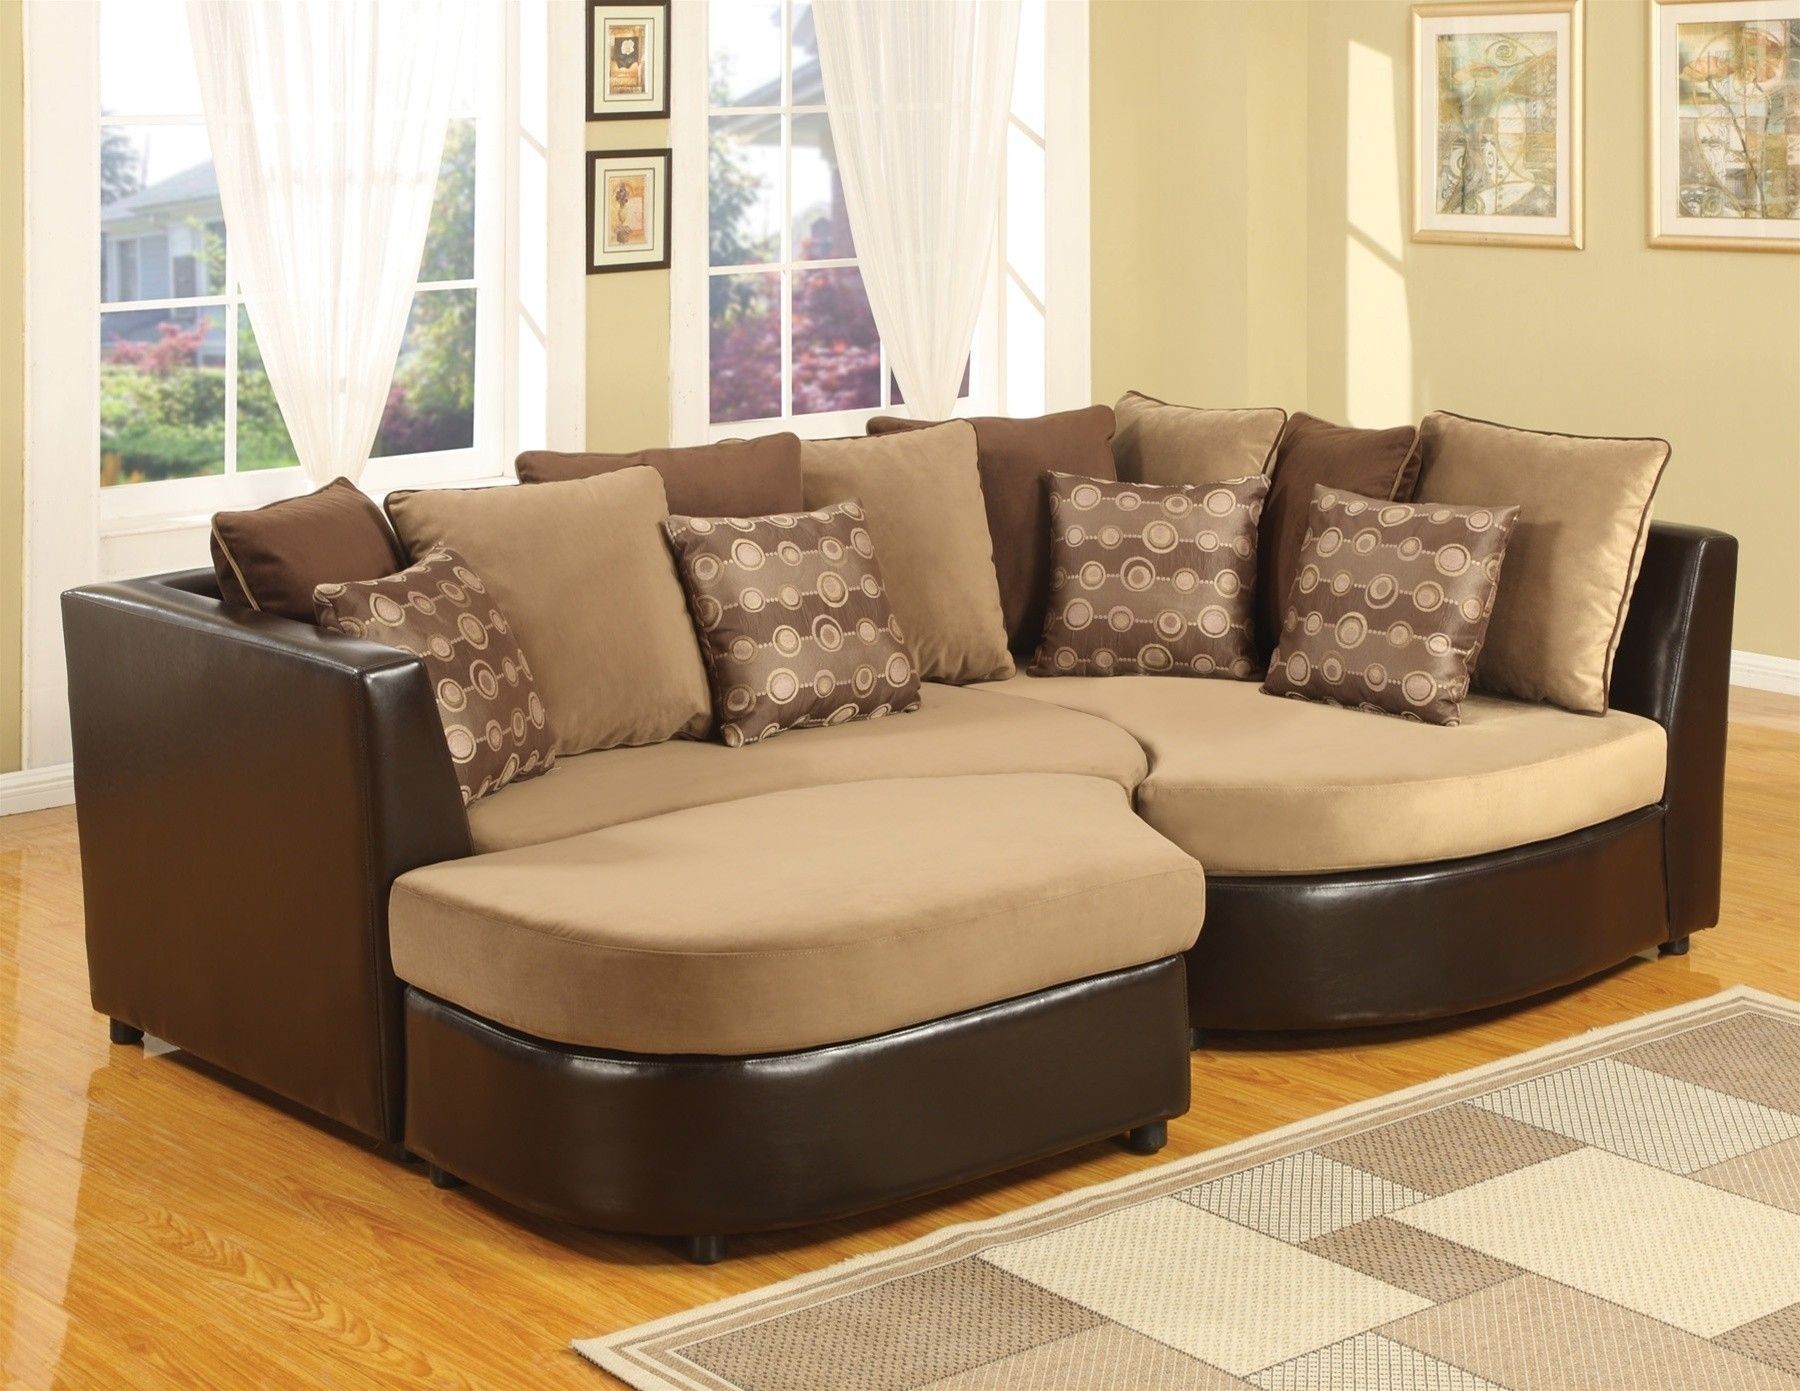 4 Piece Sectional Puzzle Sofa | Http://ml2r | Pinterest | House Intended For Macon Ga Sectional Sofas (Photo 2 of 10)